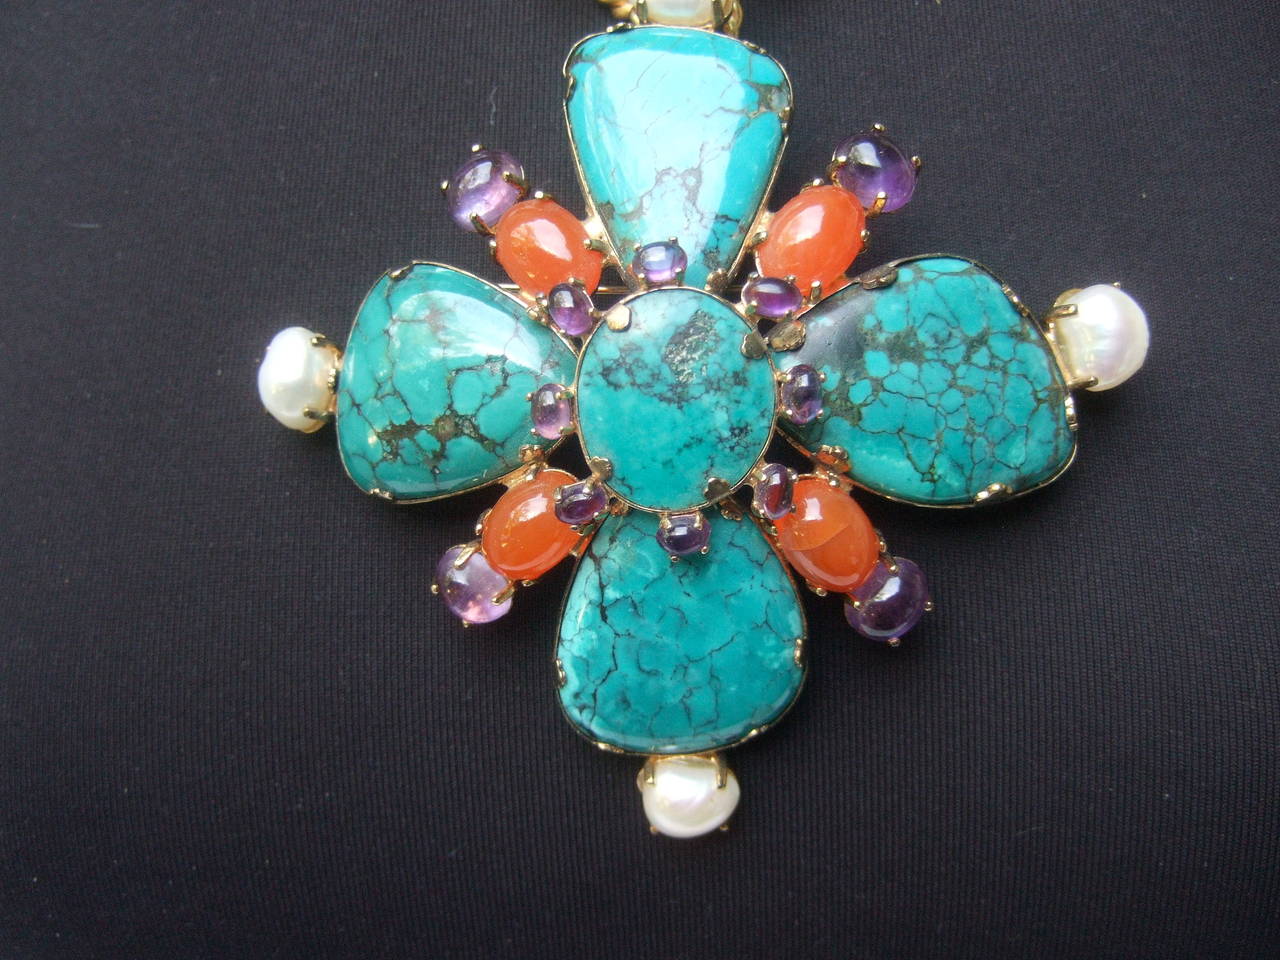 Women's Spectacular Jeweled Semi Precious Massive Sterling Brooch, 1999 For Sale